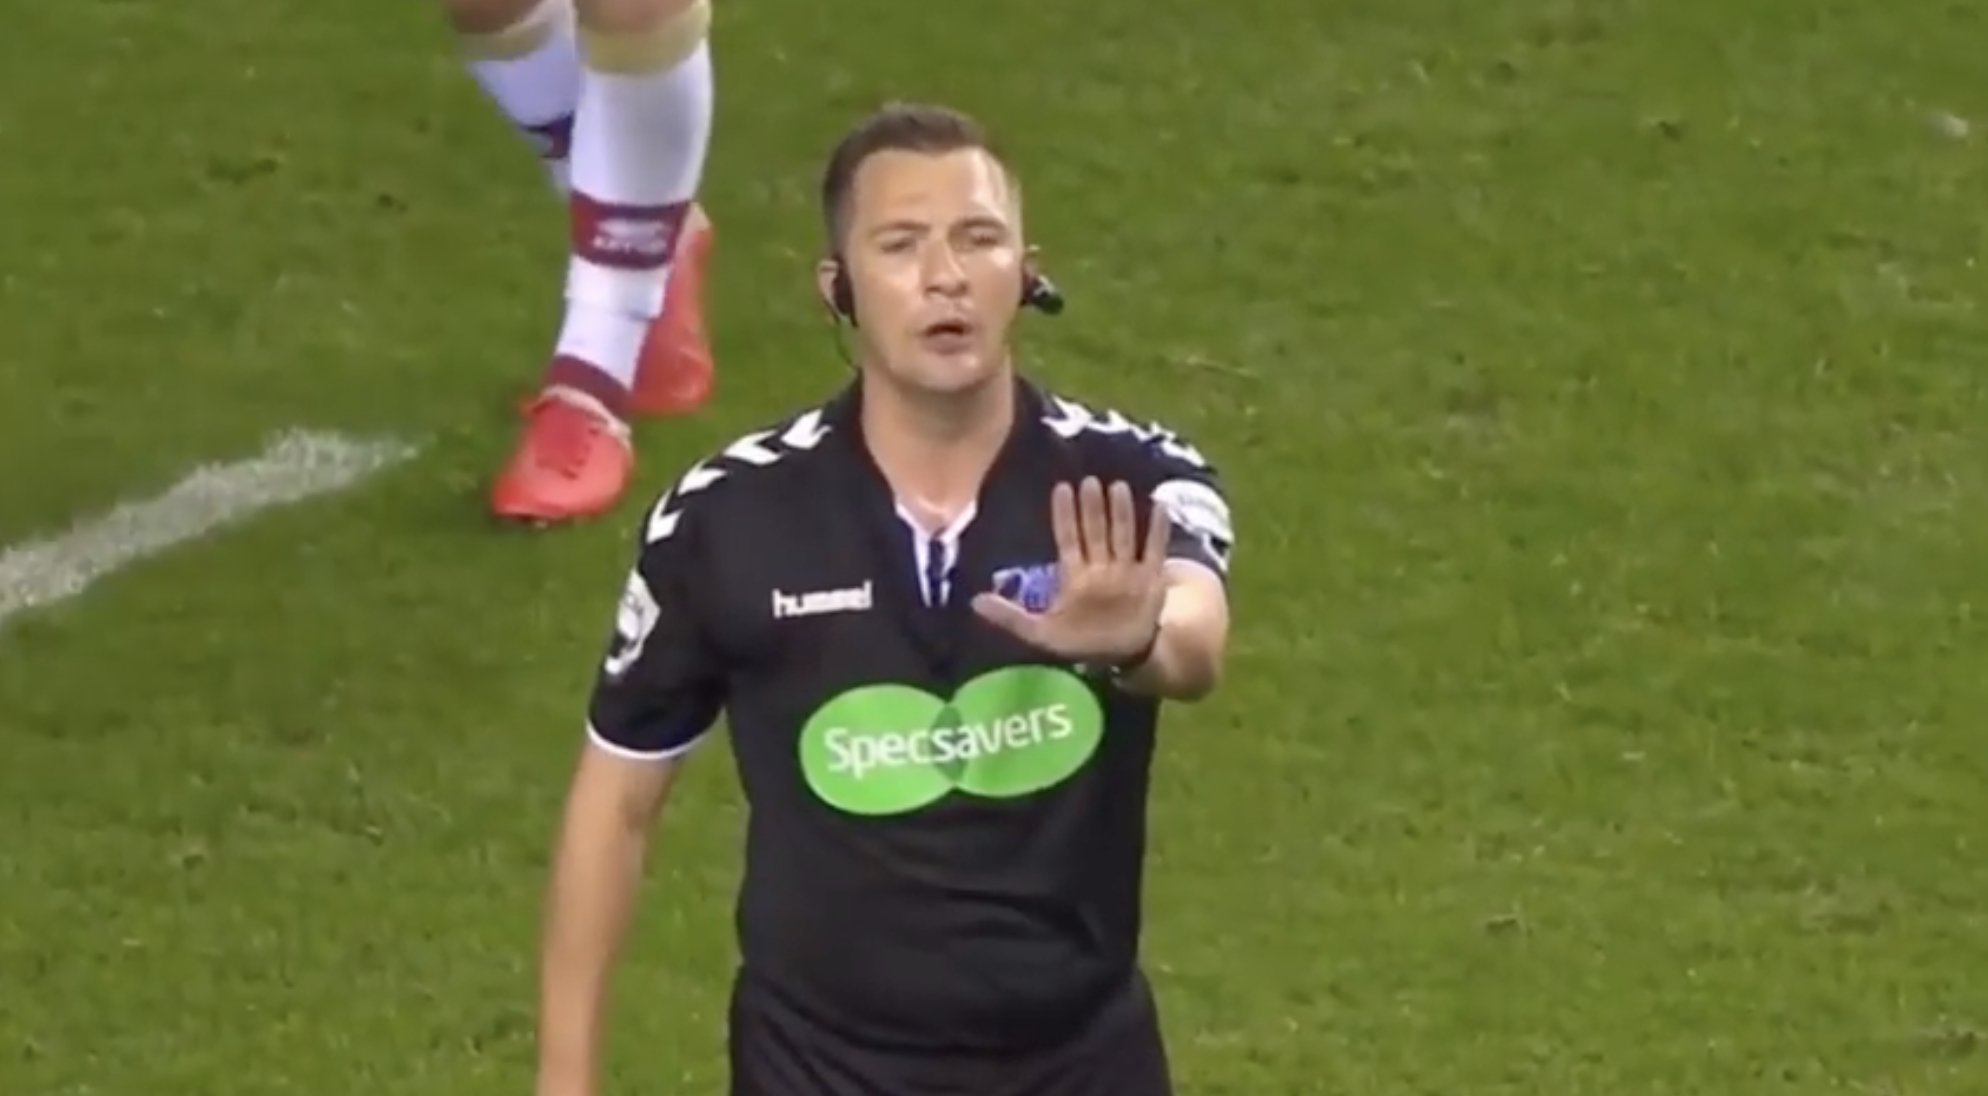 VIDEO: A 10 minute compilation has been made of refs SCHOOLING rugby player